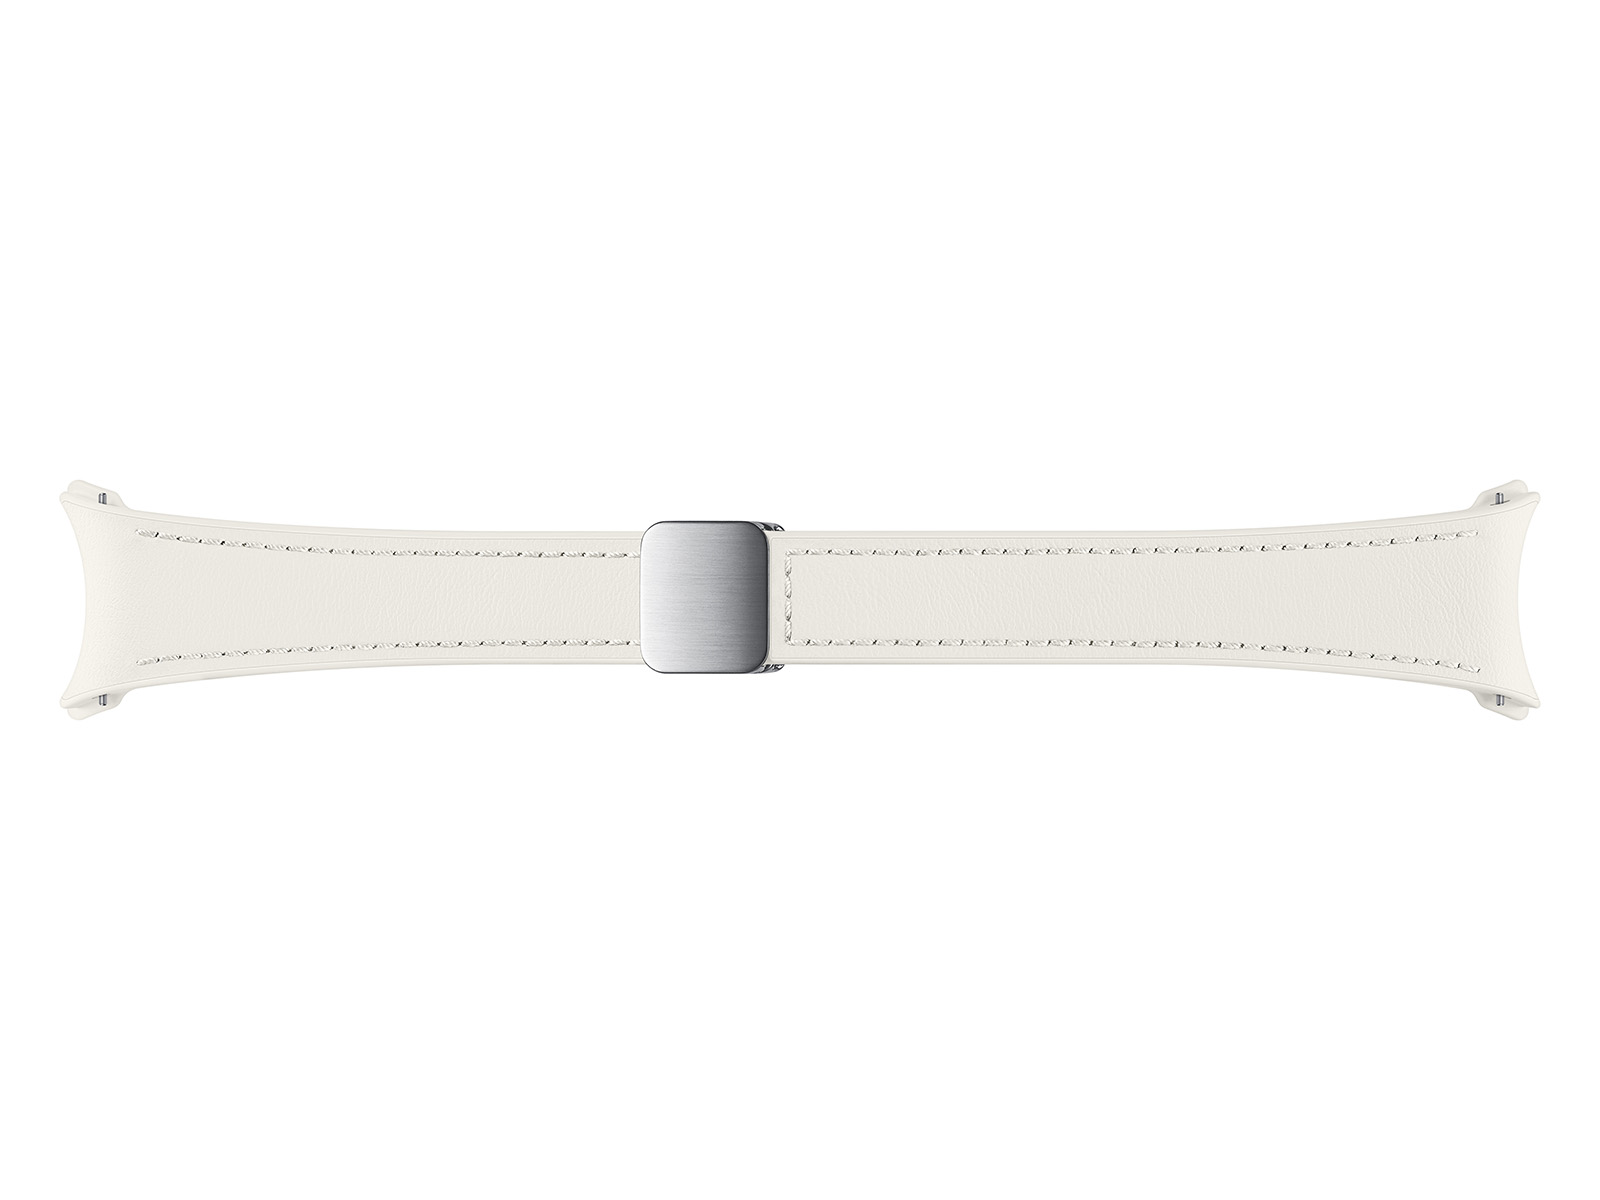  Watch Band Compatible with Samsung Galaxy Watch 6 Band